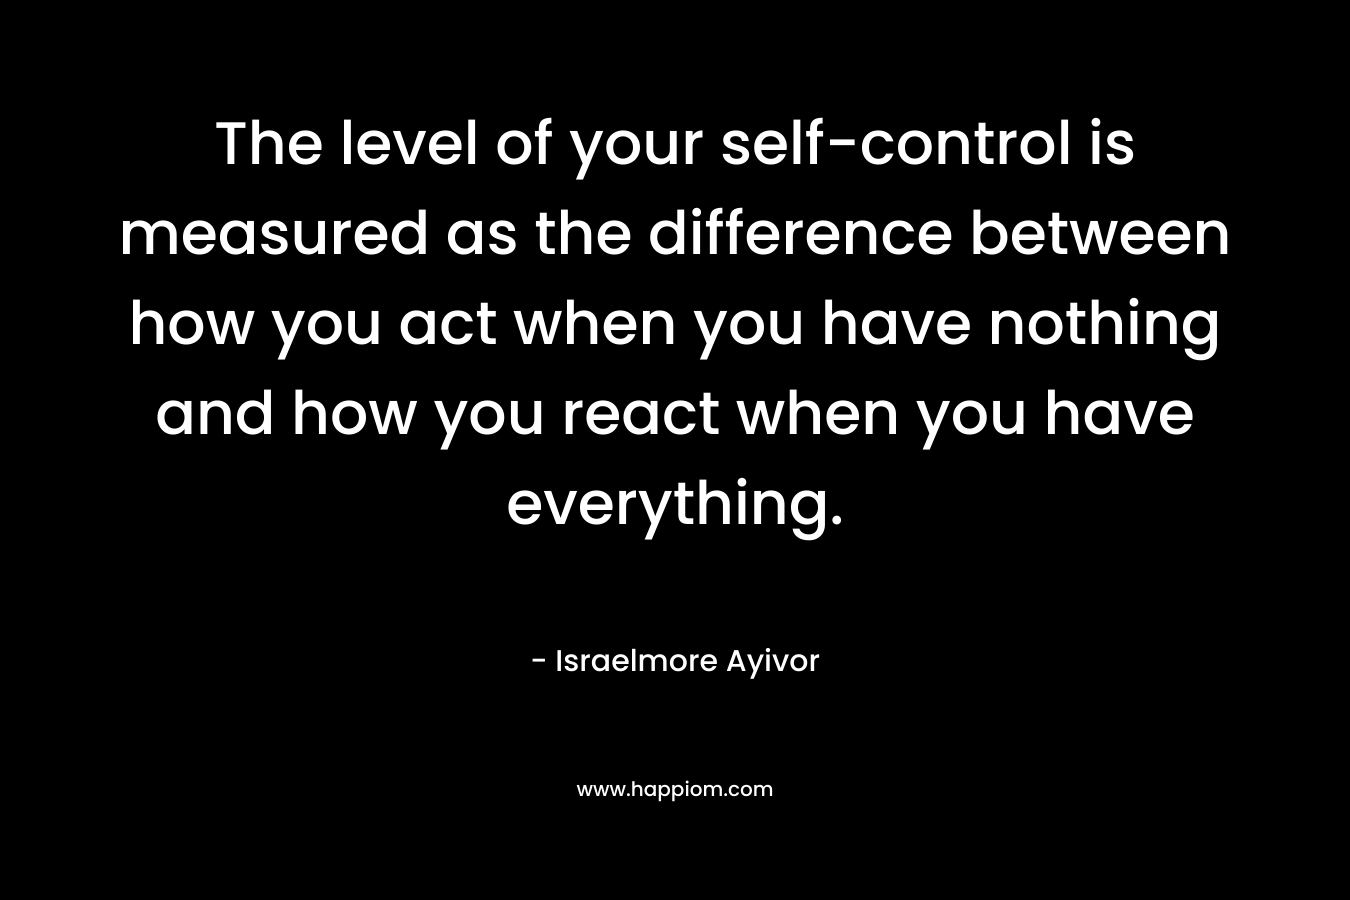 The level of your self-control is measured as the difference between how you act when you have nothing and how you react when you have everything.